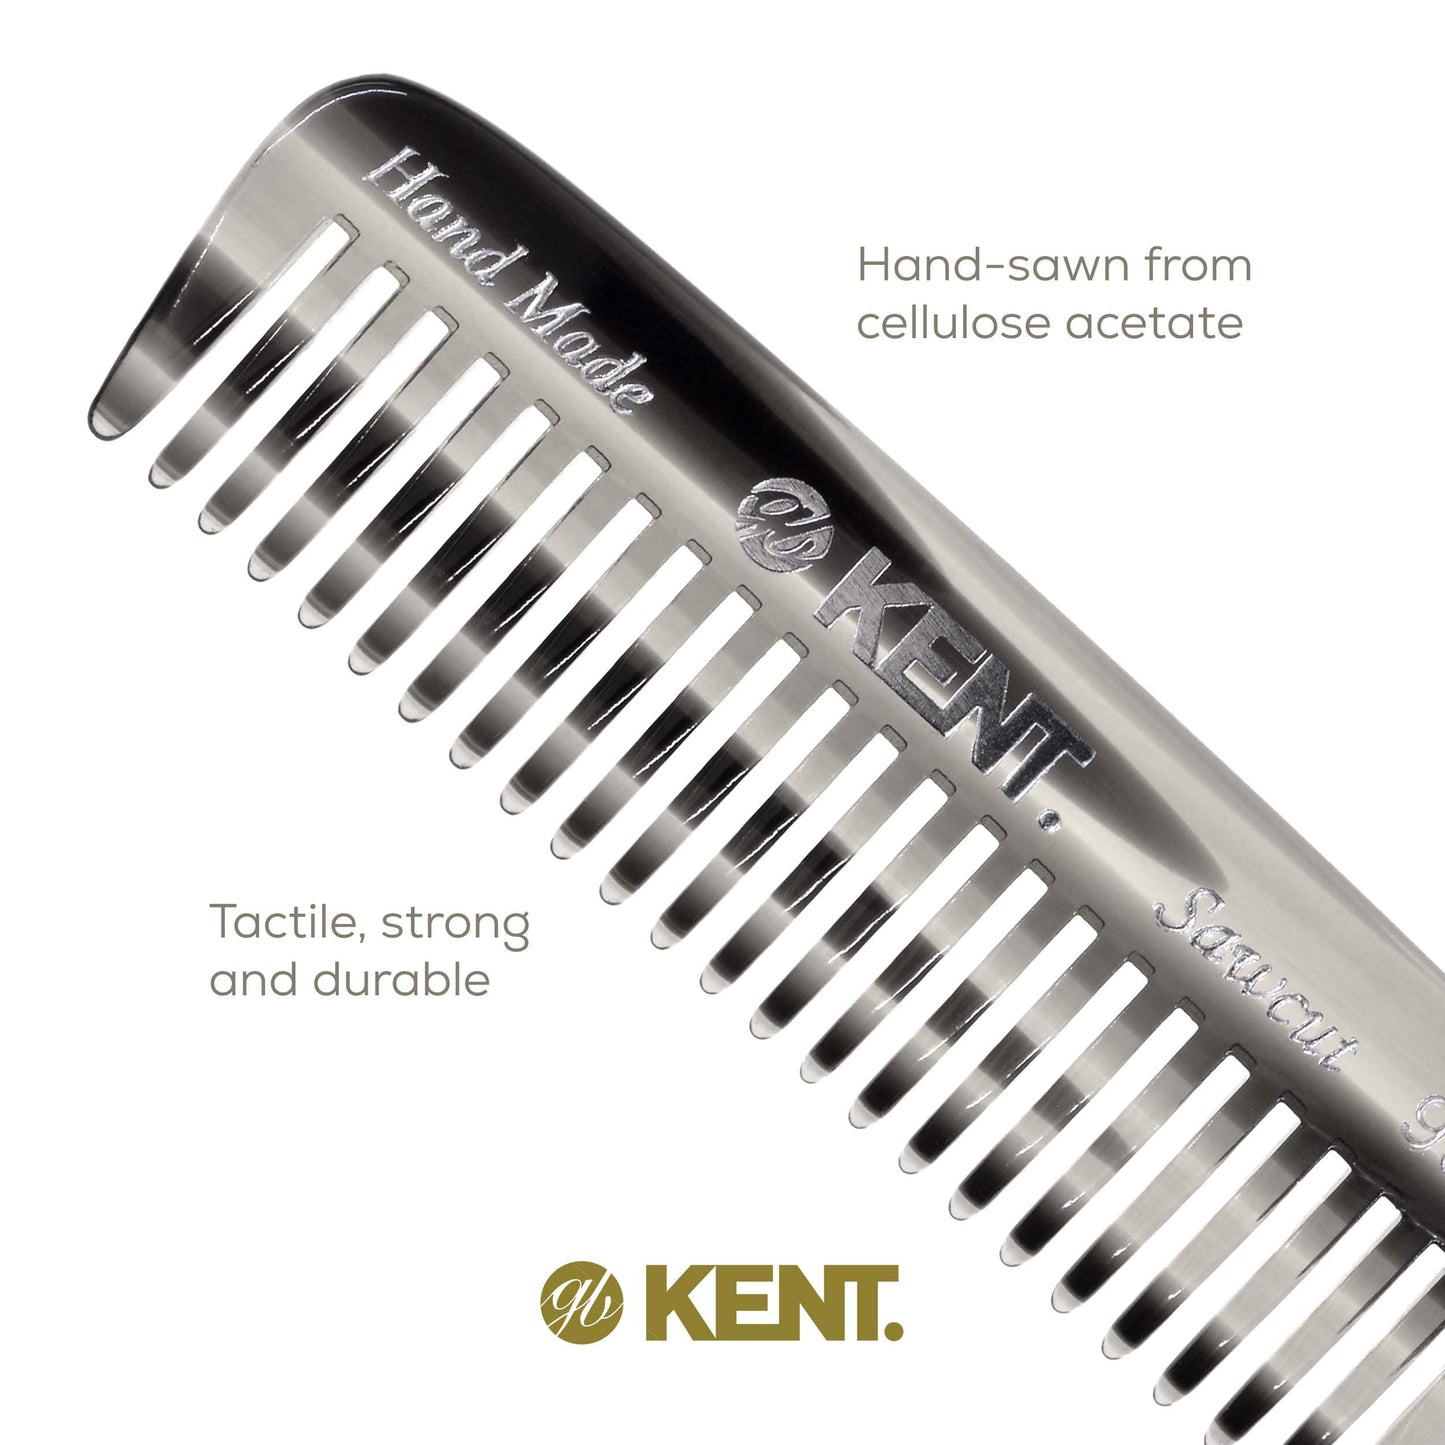 Kent 93T Mini Beard Comb for Men - Wide Tooth Men's Comb, Mustache Comb and Beard Combs ideal for Facial Hair, Small Pocket Sized Travel Comb, Mini Comb Detangle Comb for Beard Detangling Comb